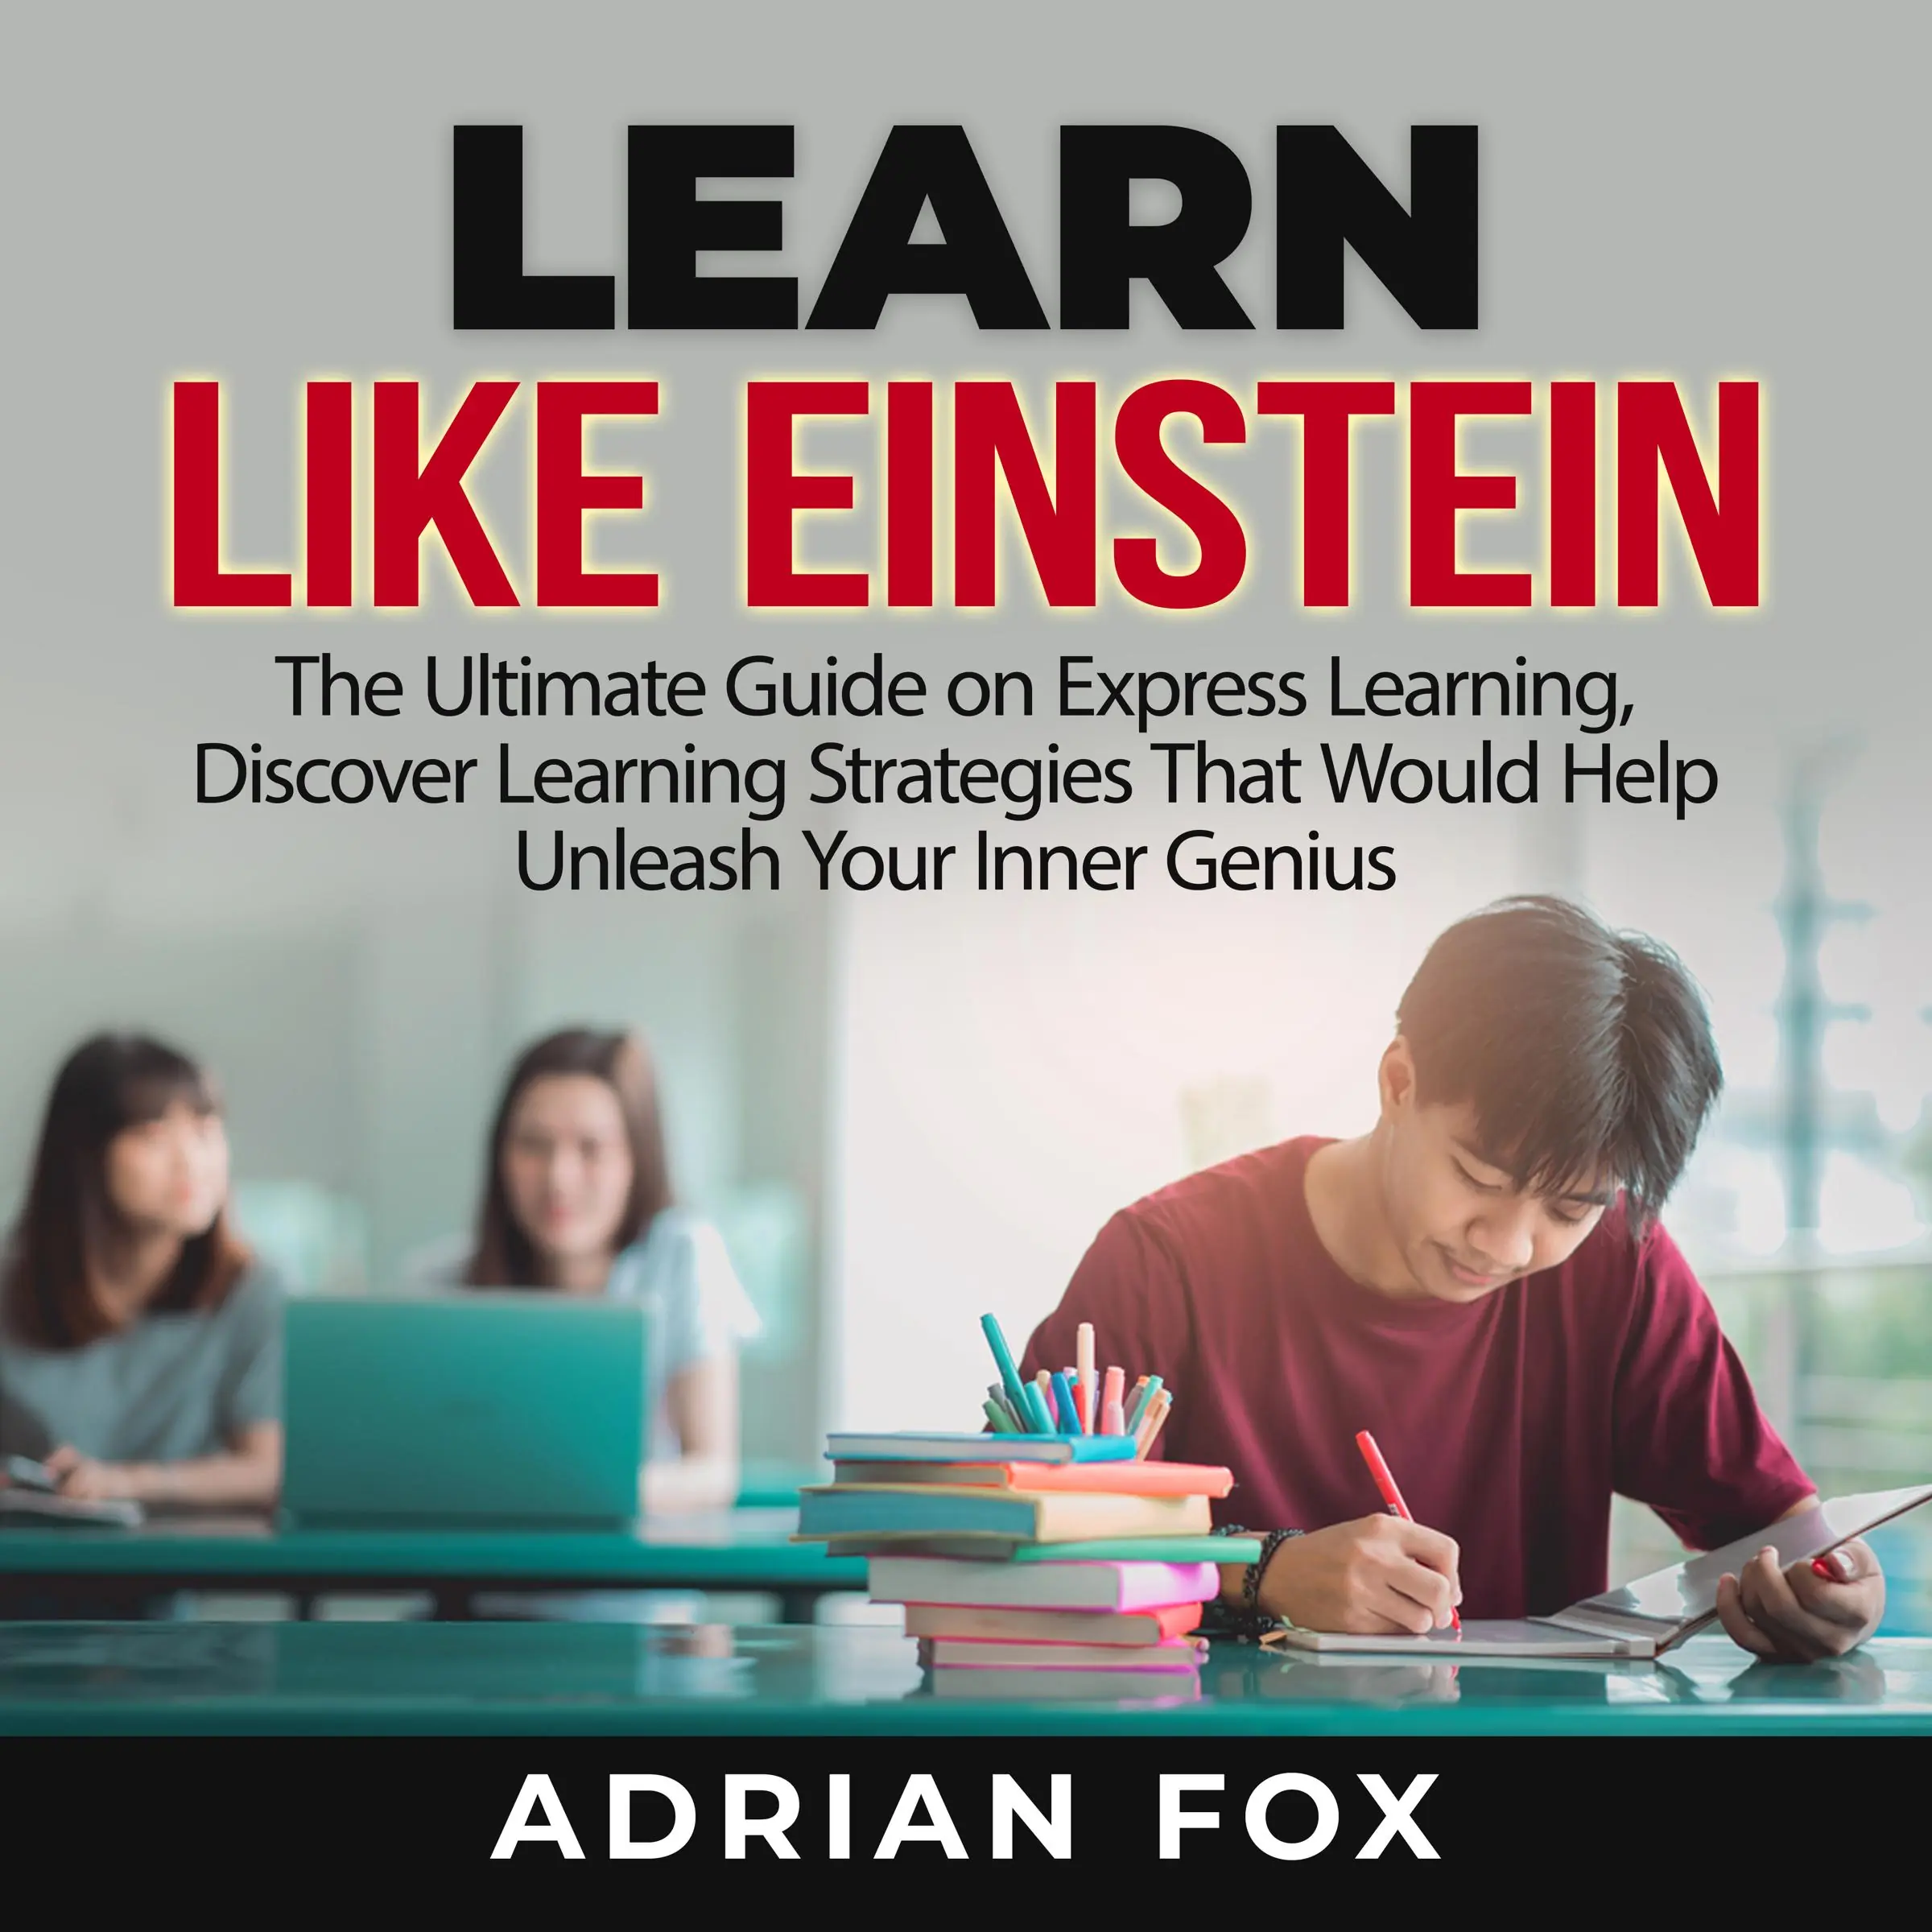 Learn Like Einstein: The Ultimate Guide on Express Learning, Discover Learning Strategies That Would Help Unleash Your Inner Genius by Adrian Fox Audiobook